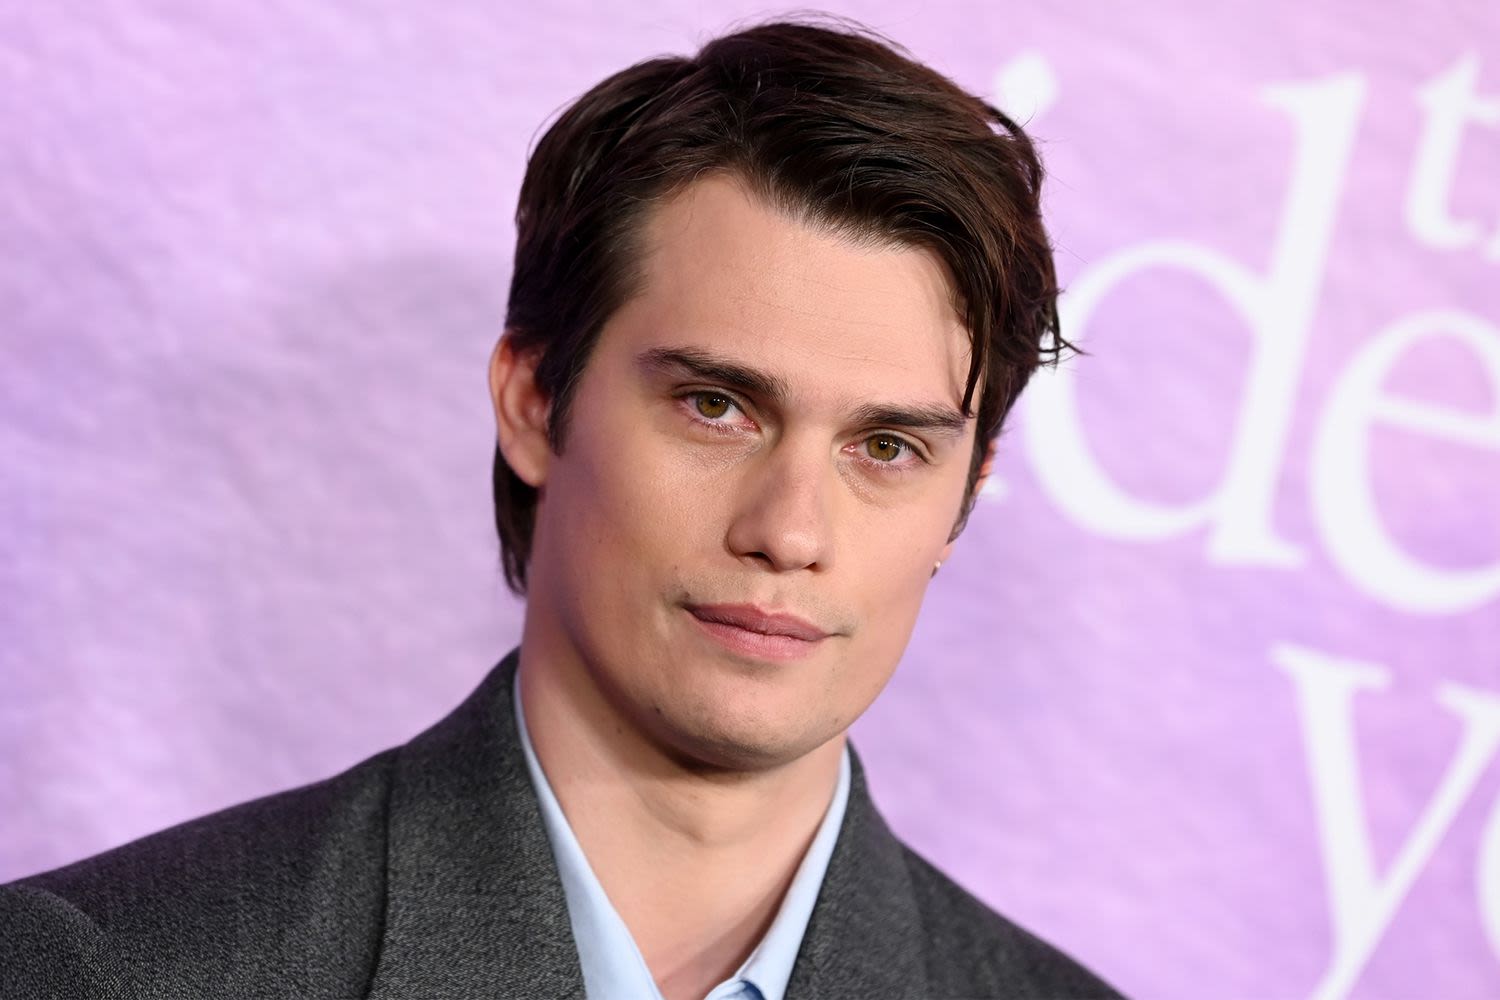 Nicholas Galitzine says his fame has made him feel like a 'cut of beef at a meat market'